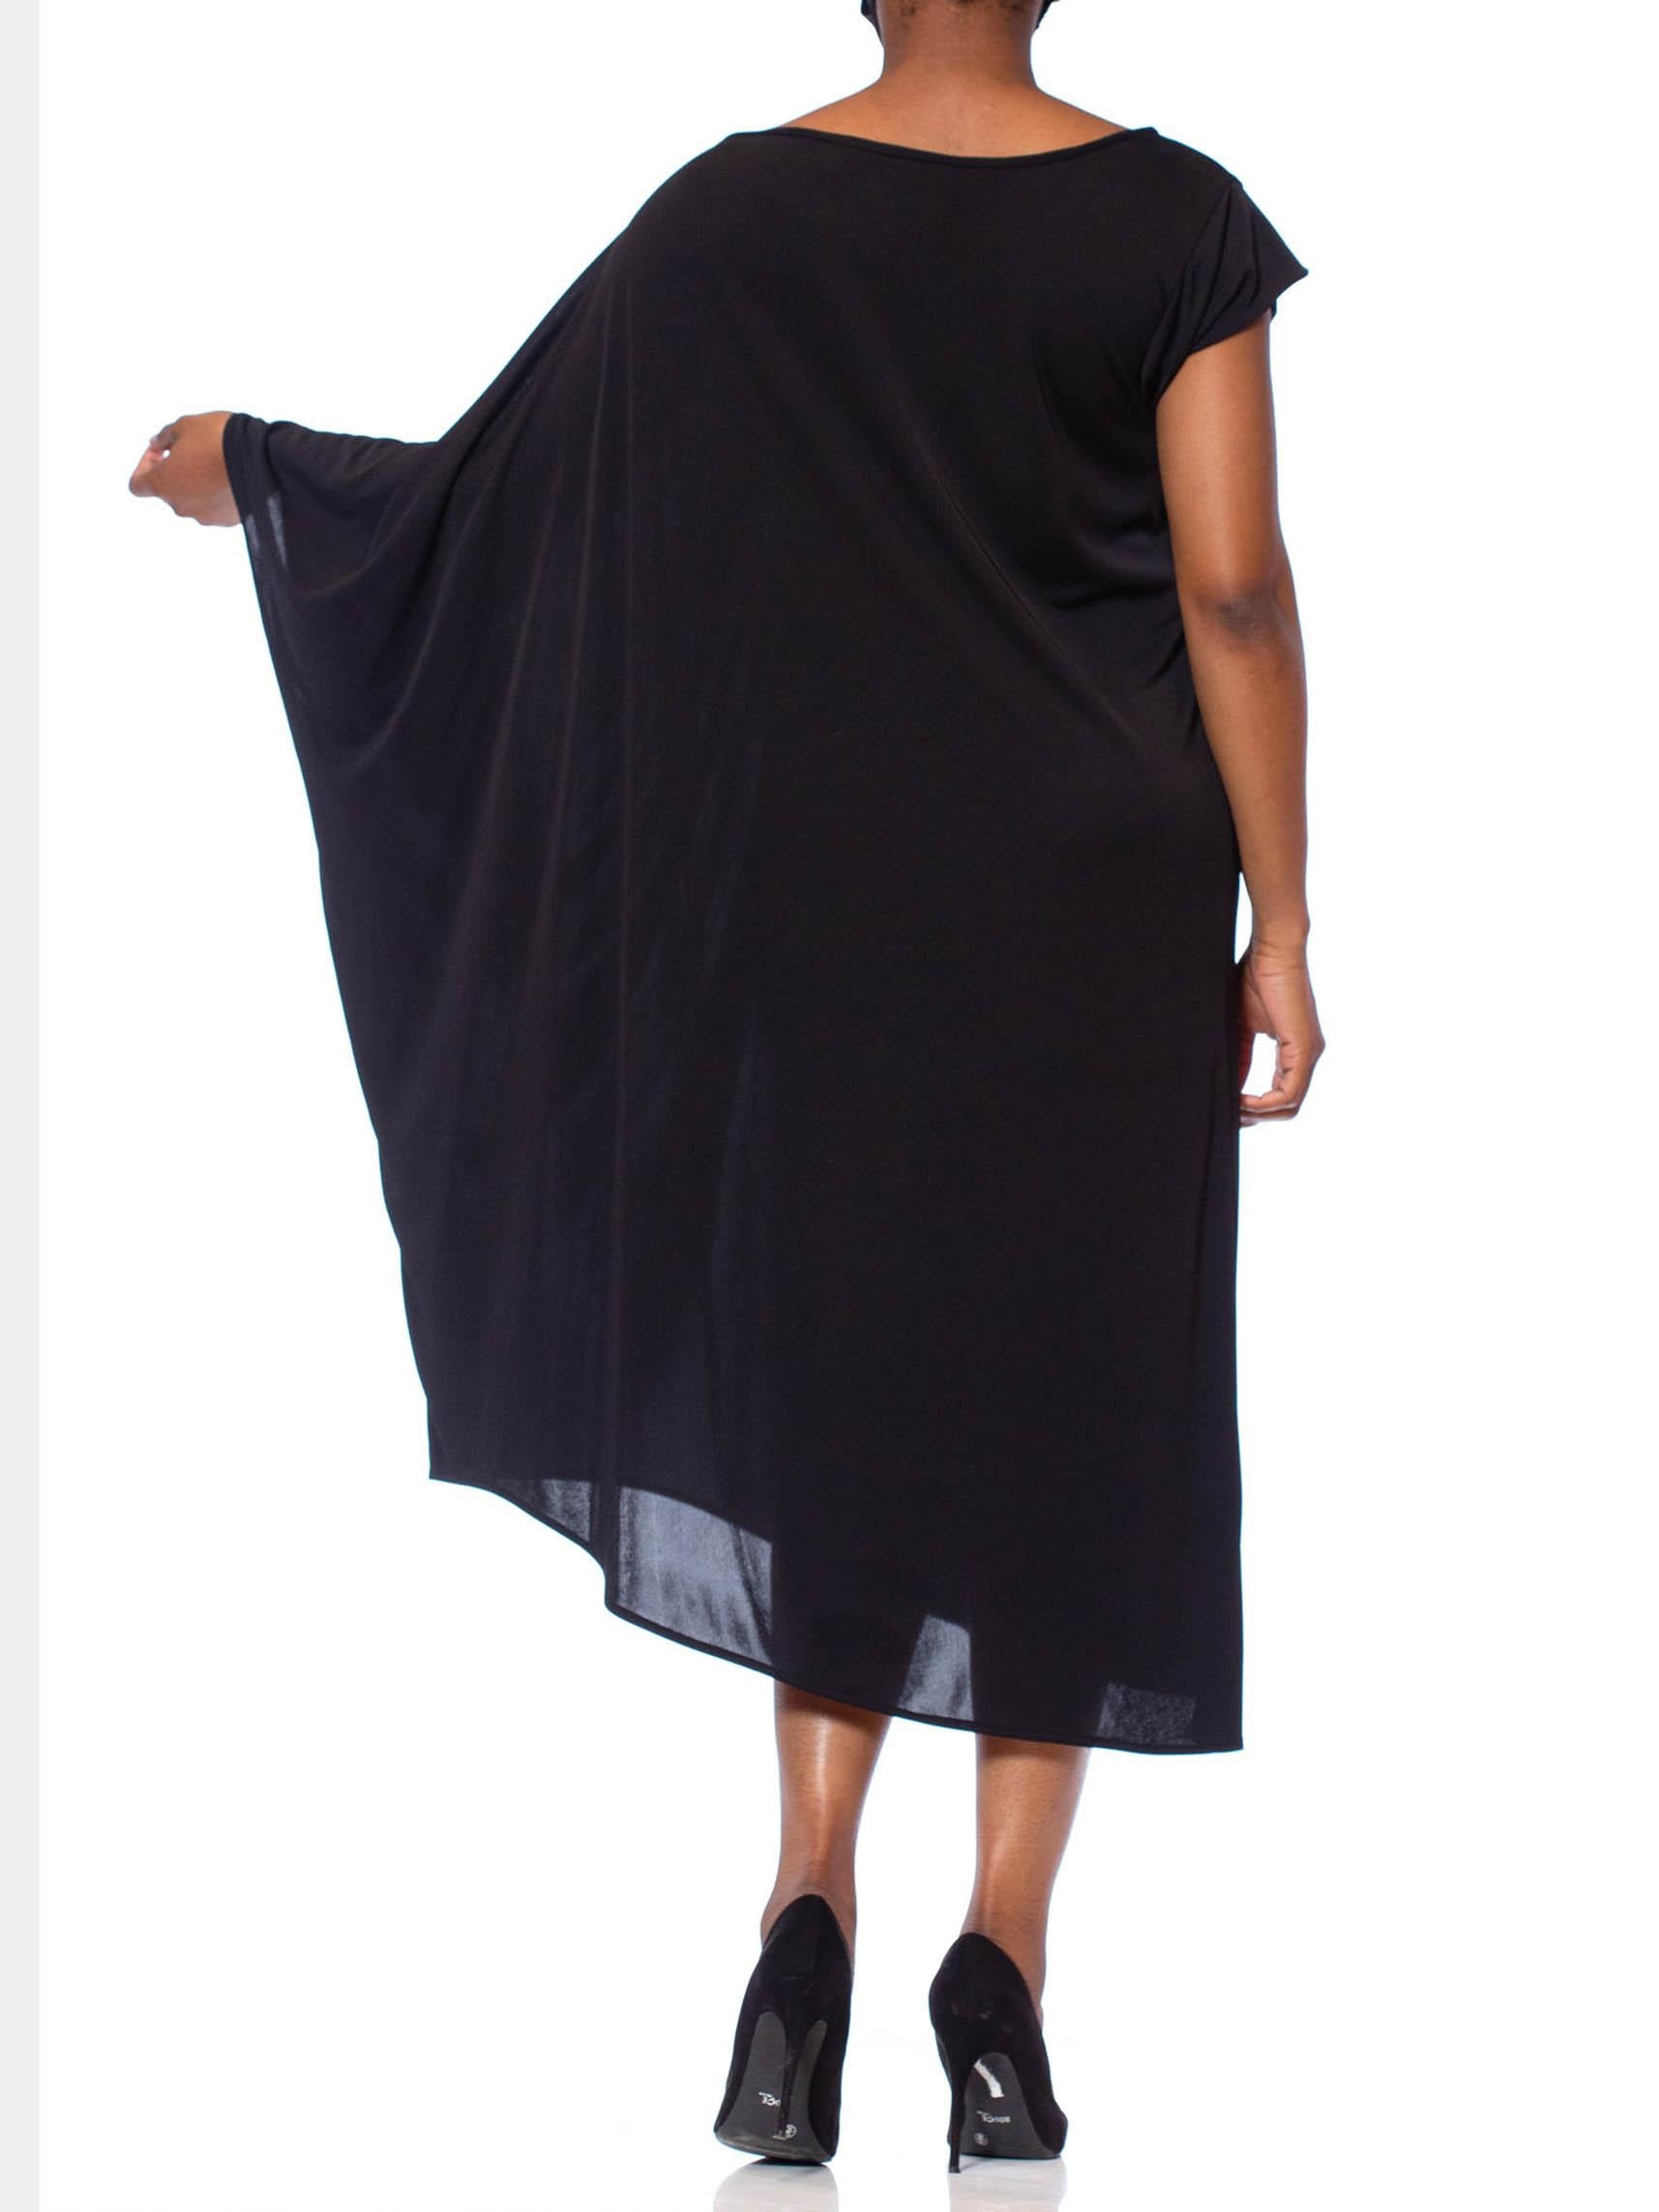 Black Poly Blend Jersey One Sleeve Kaftan Dress In Excellent Condition For Sale In New York, NY